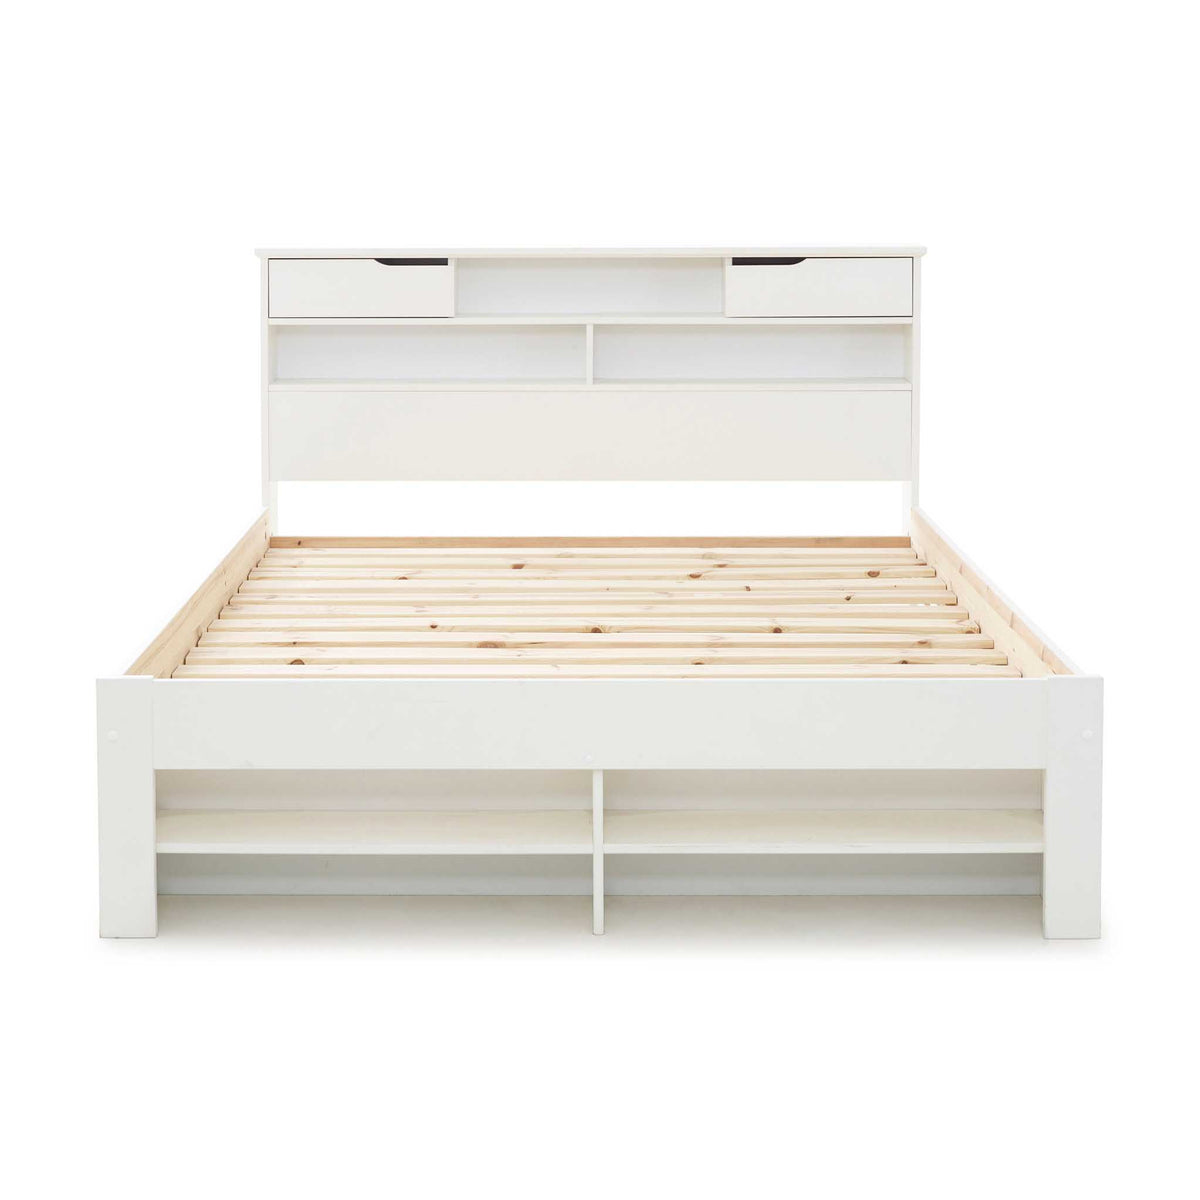 front view of the Farndon White Storage Bed